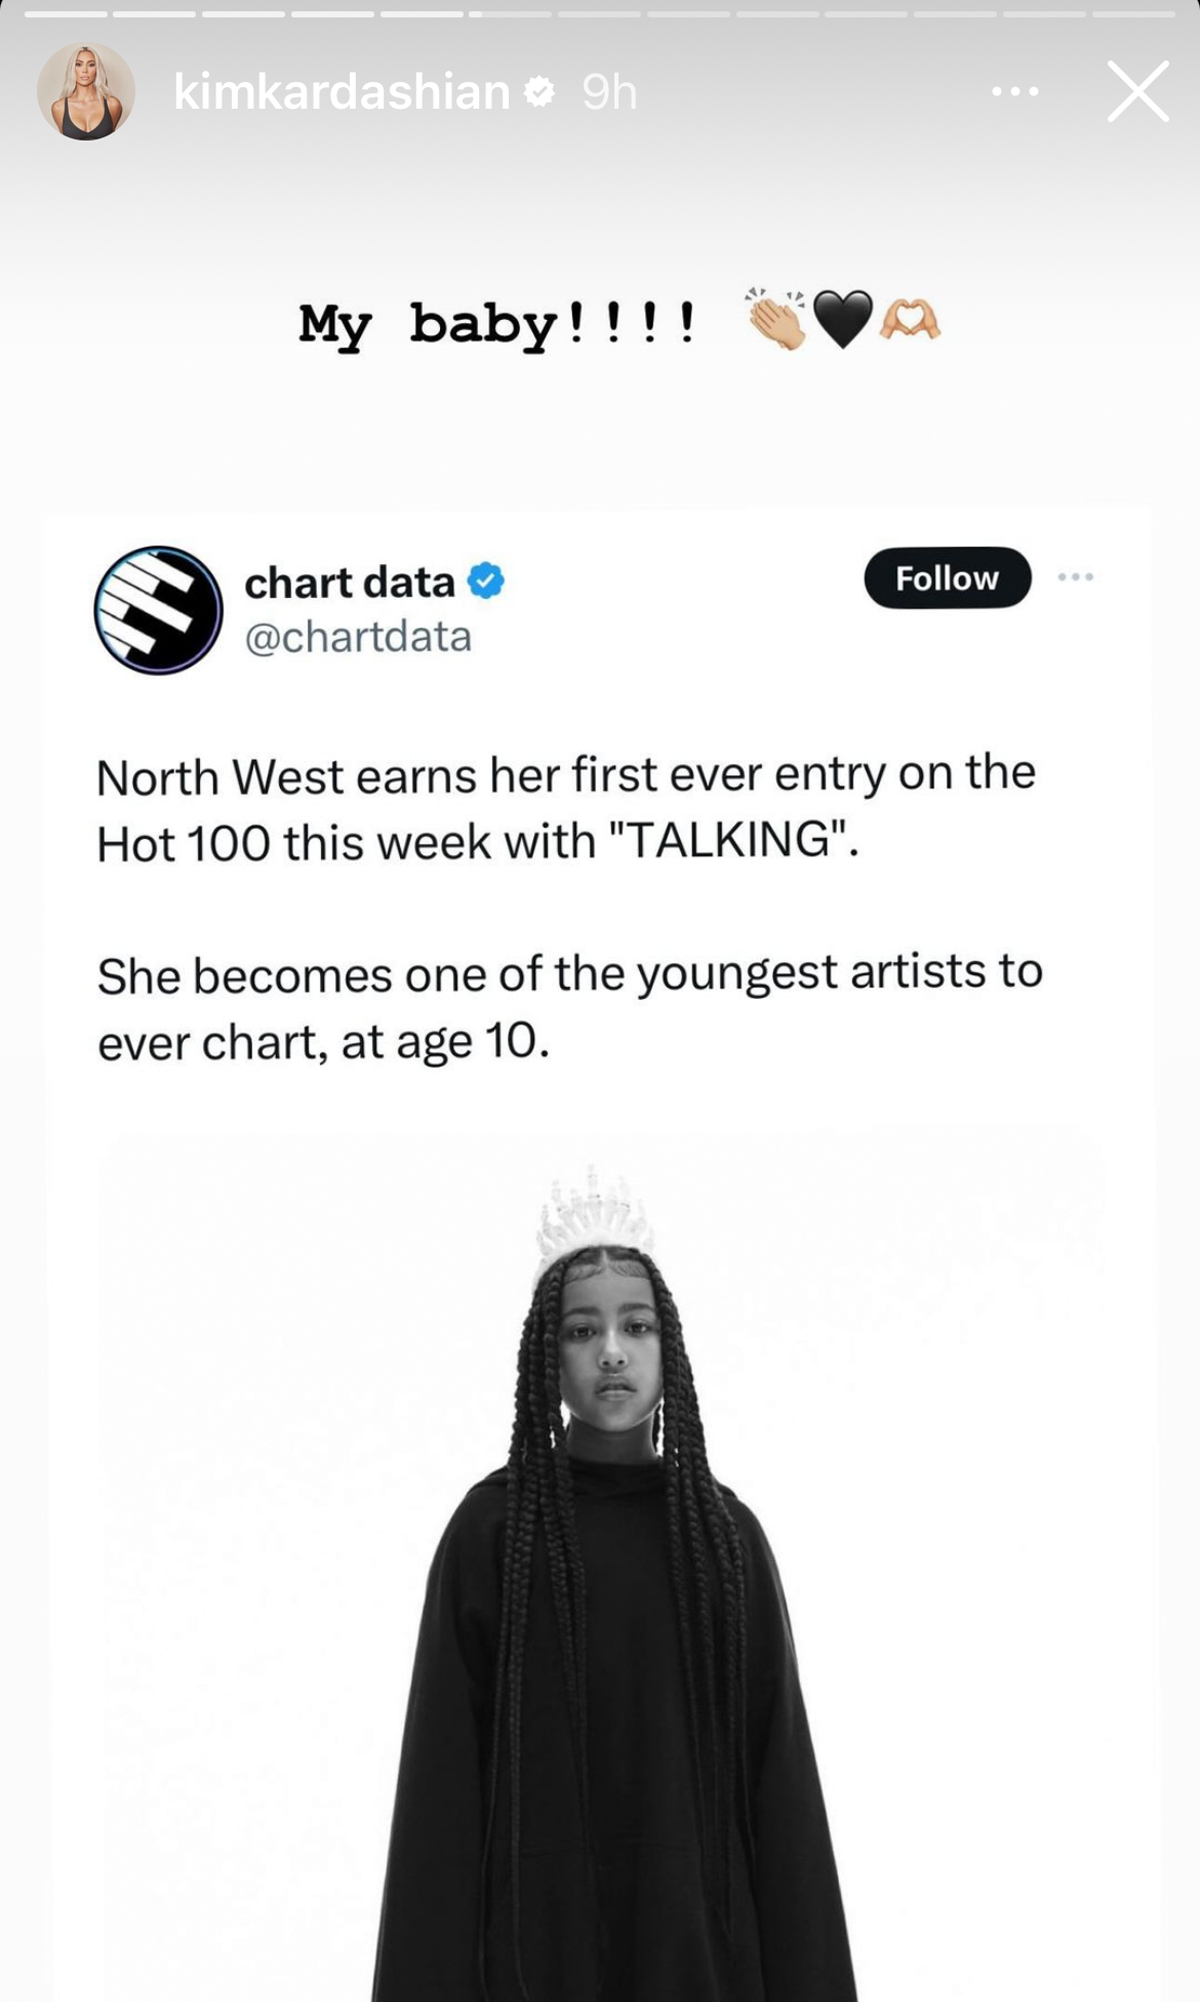 Kim Kardashian Celebrates North West Becoming One Of The Youngest Artists To Chart On Billboard’s Hot 100